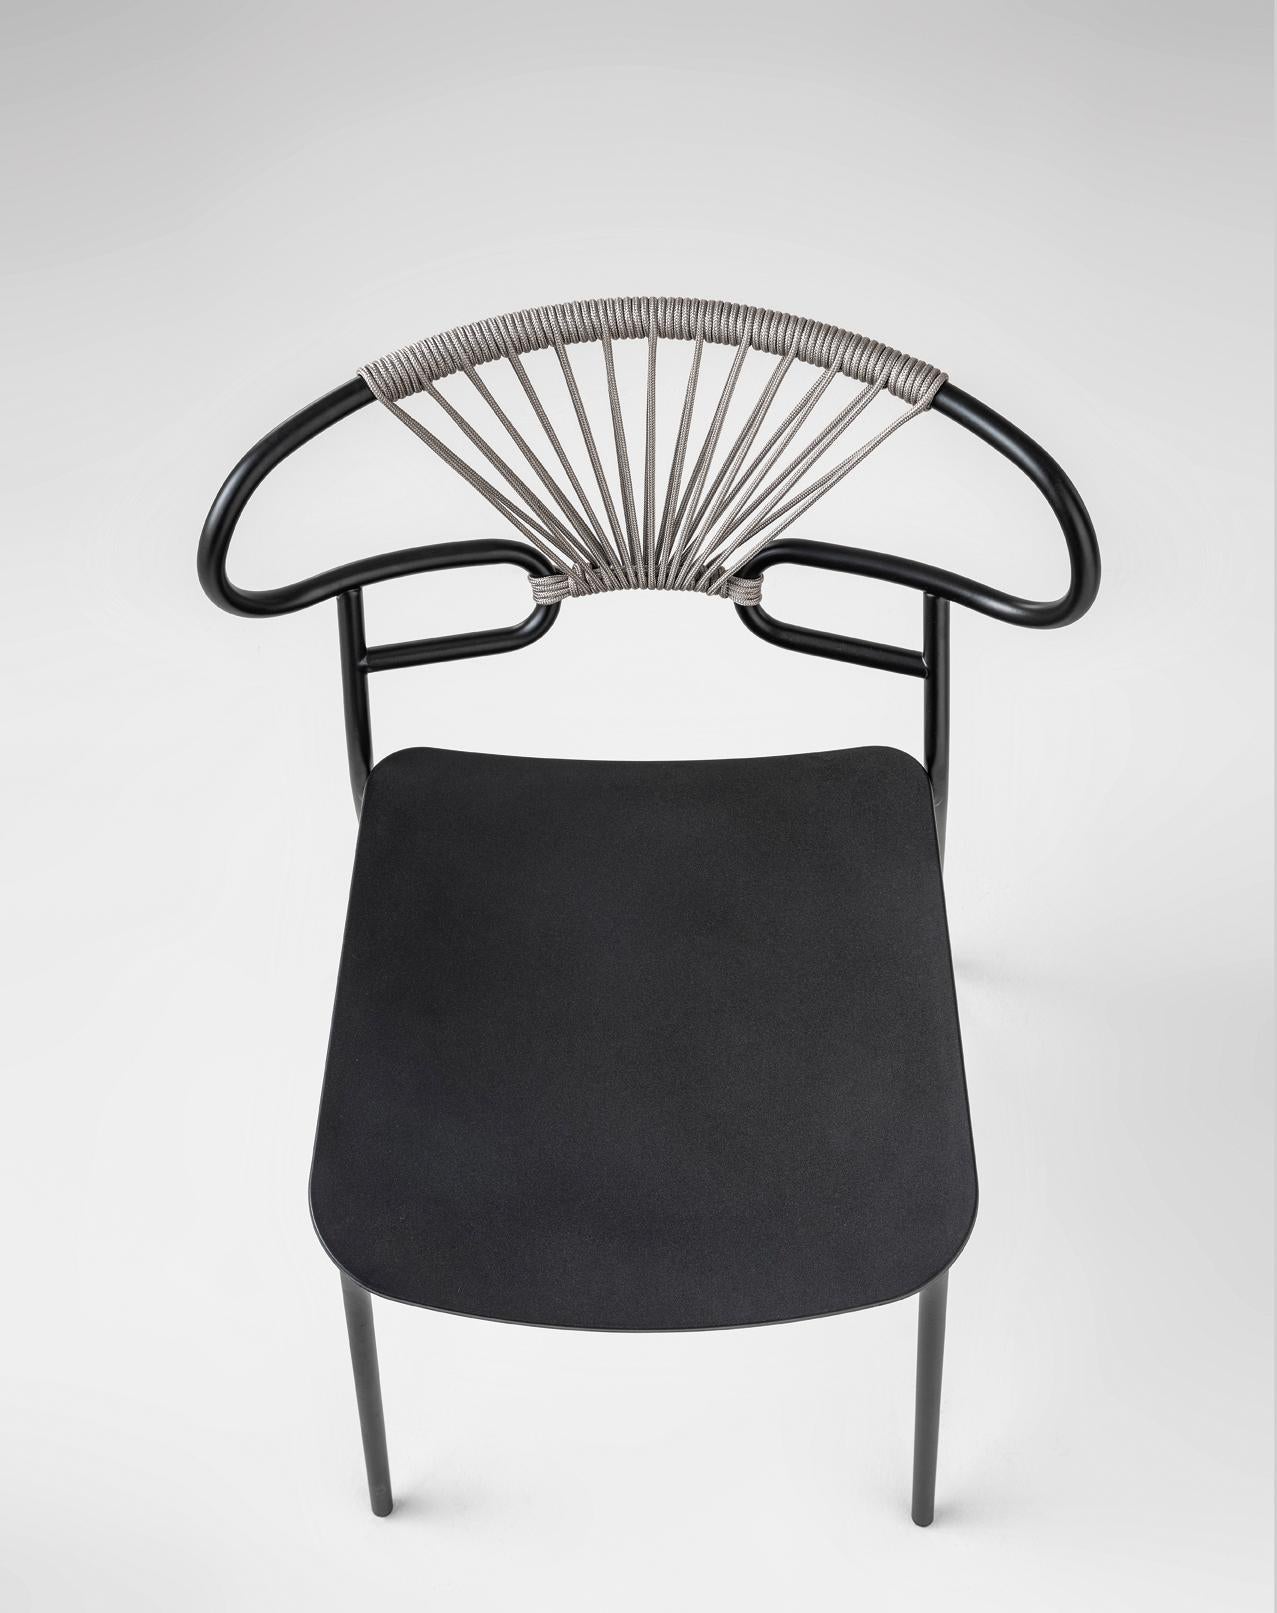 The Genoa chair collection, by talented young designer Cesare Ehr, featuring a stool and a chair with armrests, is also available in an outdoor version. The distinguishing element is the ‘one-line’ backrest, obtained by curving a single metal tube